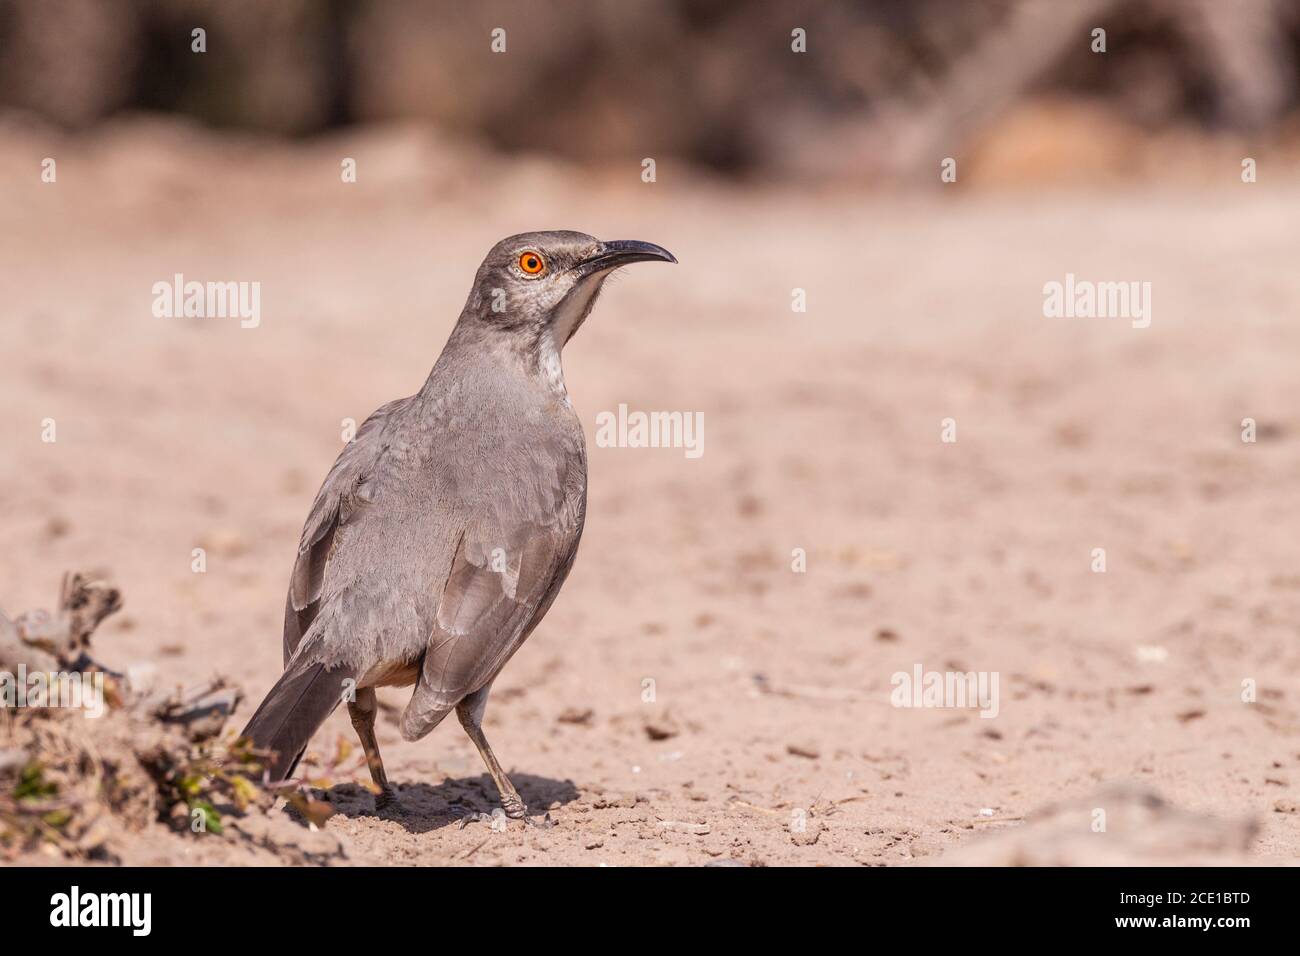 Curve-billed Thrasher, Toxostoma curvirostre at the Javelina-Martin ranch and refuge near McAllen, Texas, in the Rio Grande Valley. Stock Photo